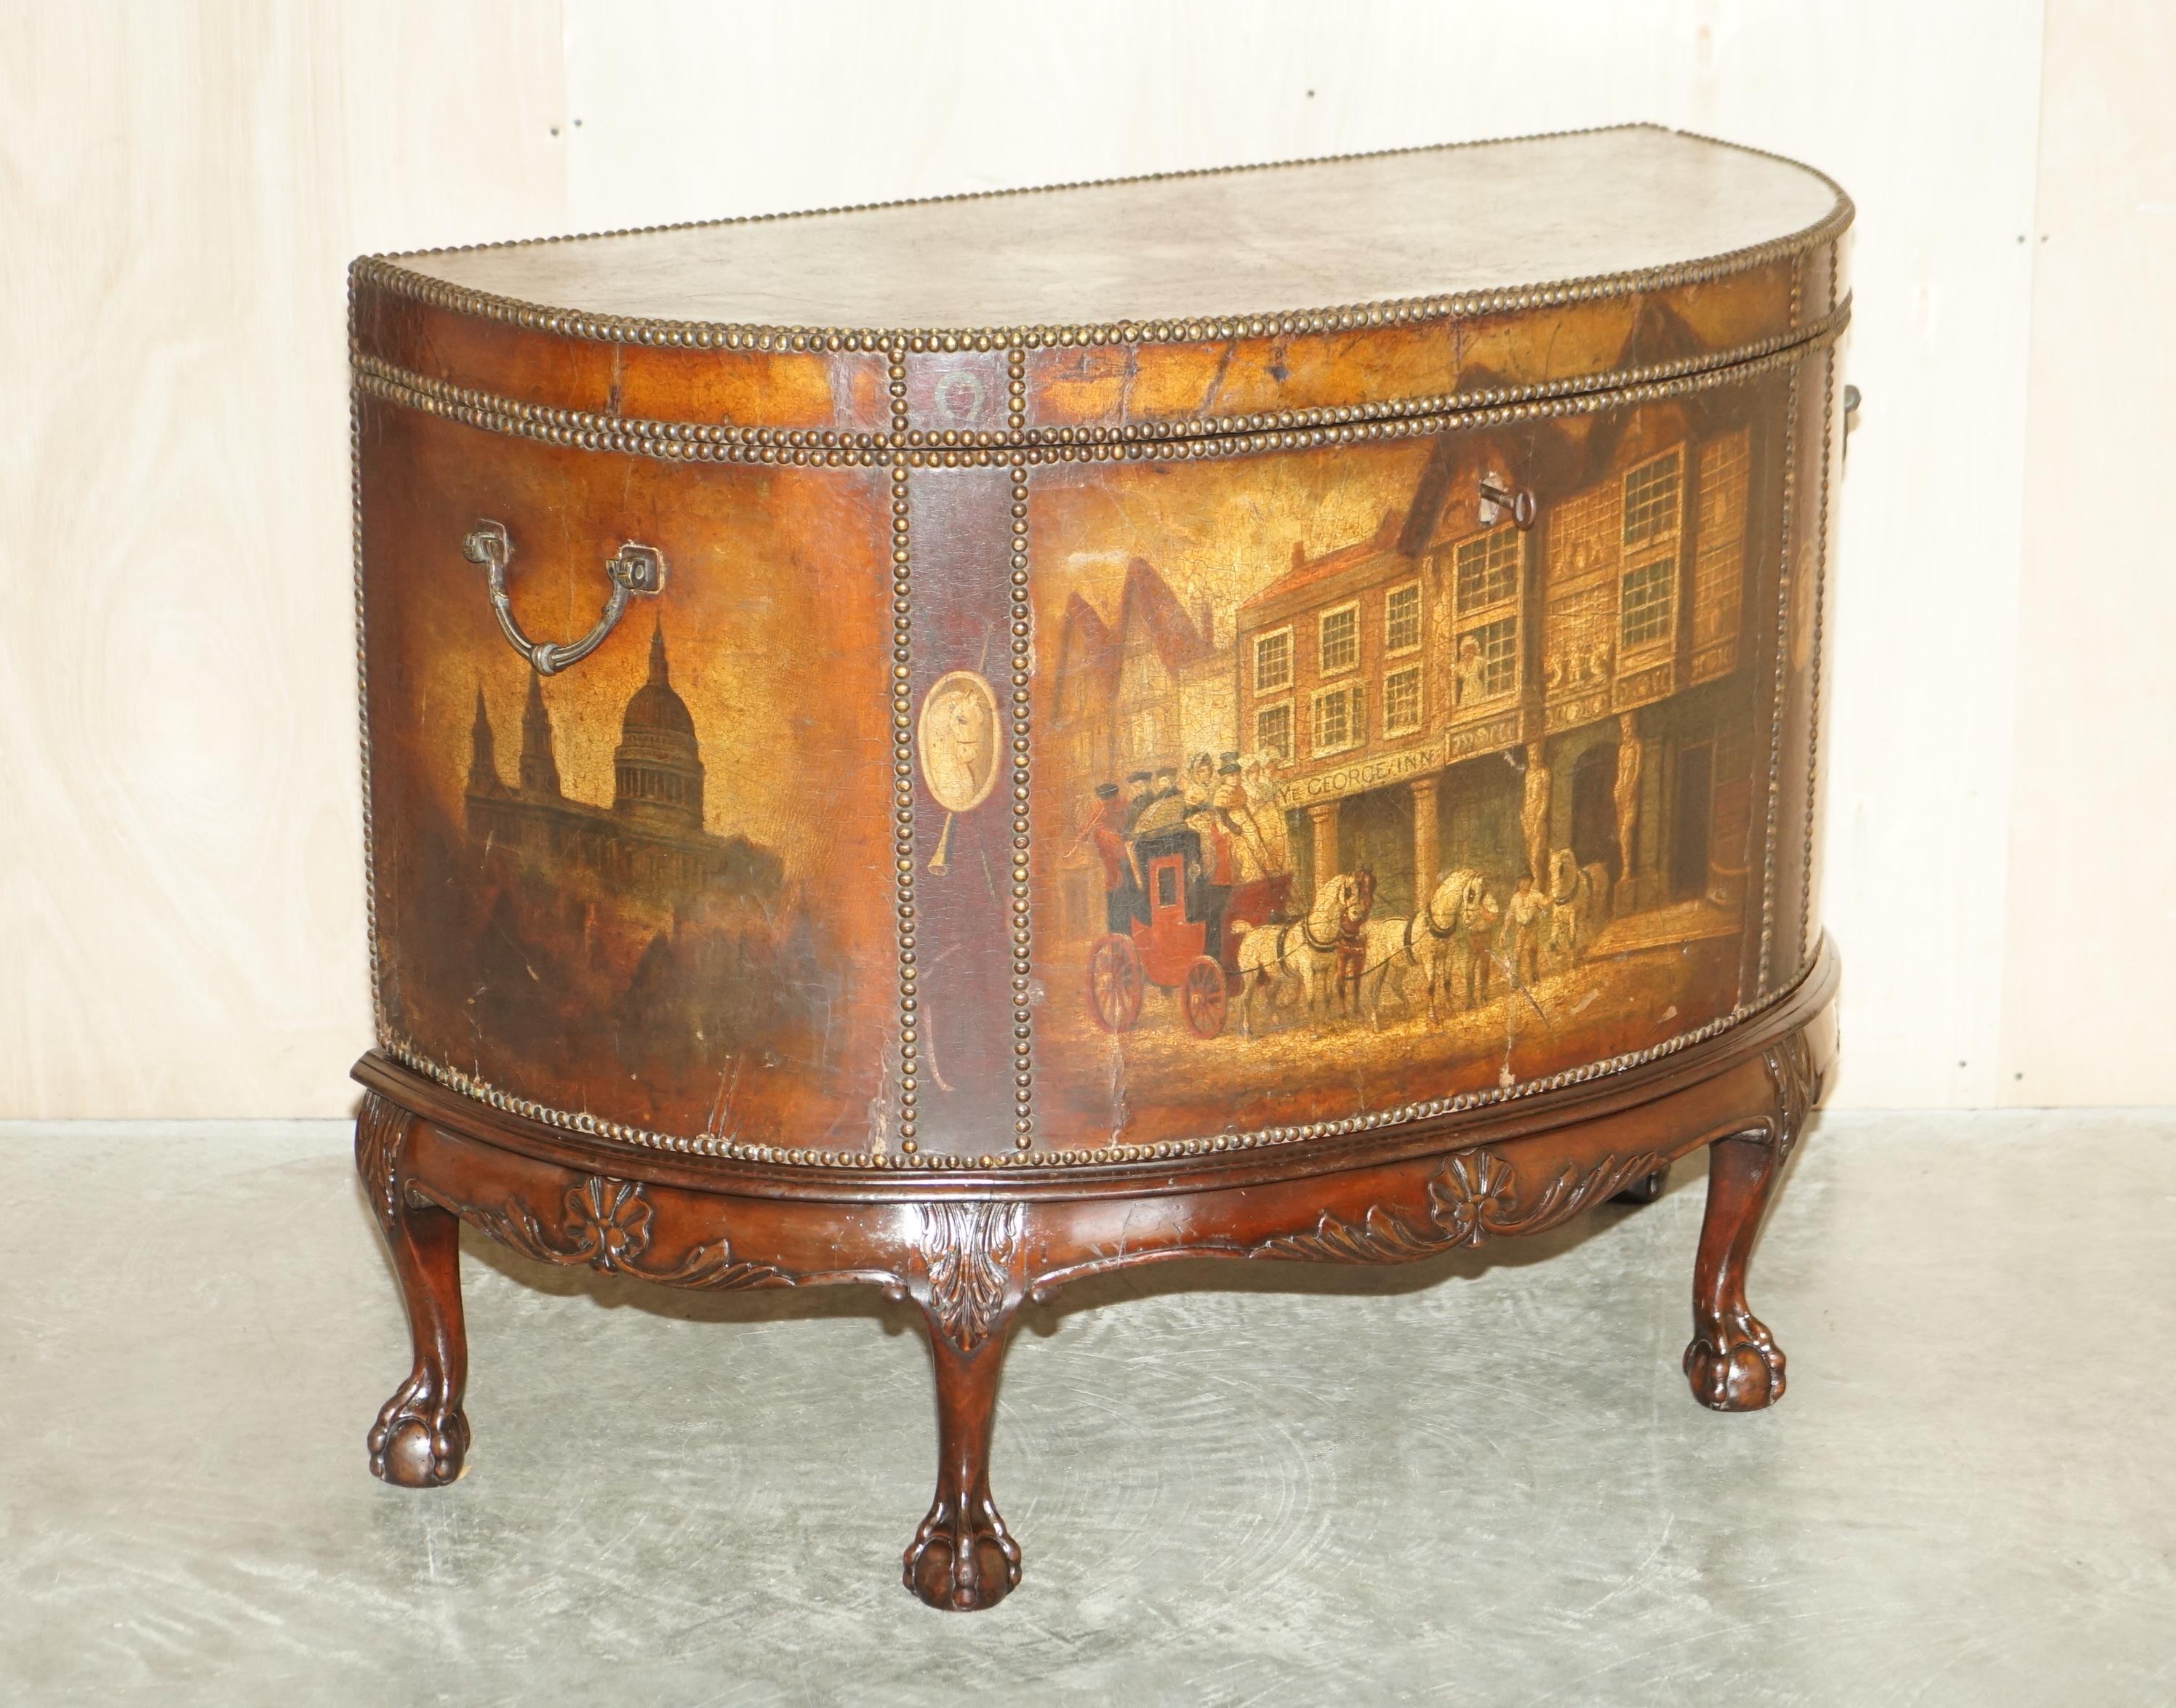 Royal House Antiques

Royal House Antiques is delighted to offer for sale this extremely important, museum quality, hand painted leather clad trunk sideboard depicting rural scenes with horses

Please note the delivery fee listed is just a guide, it